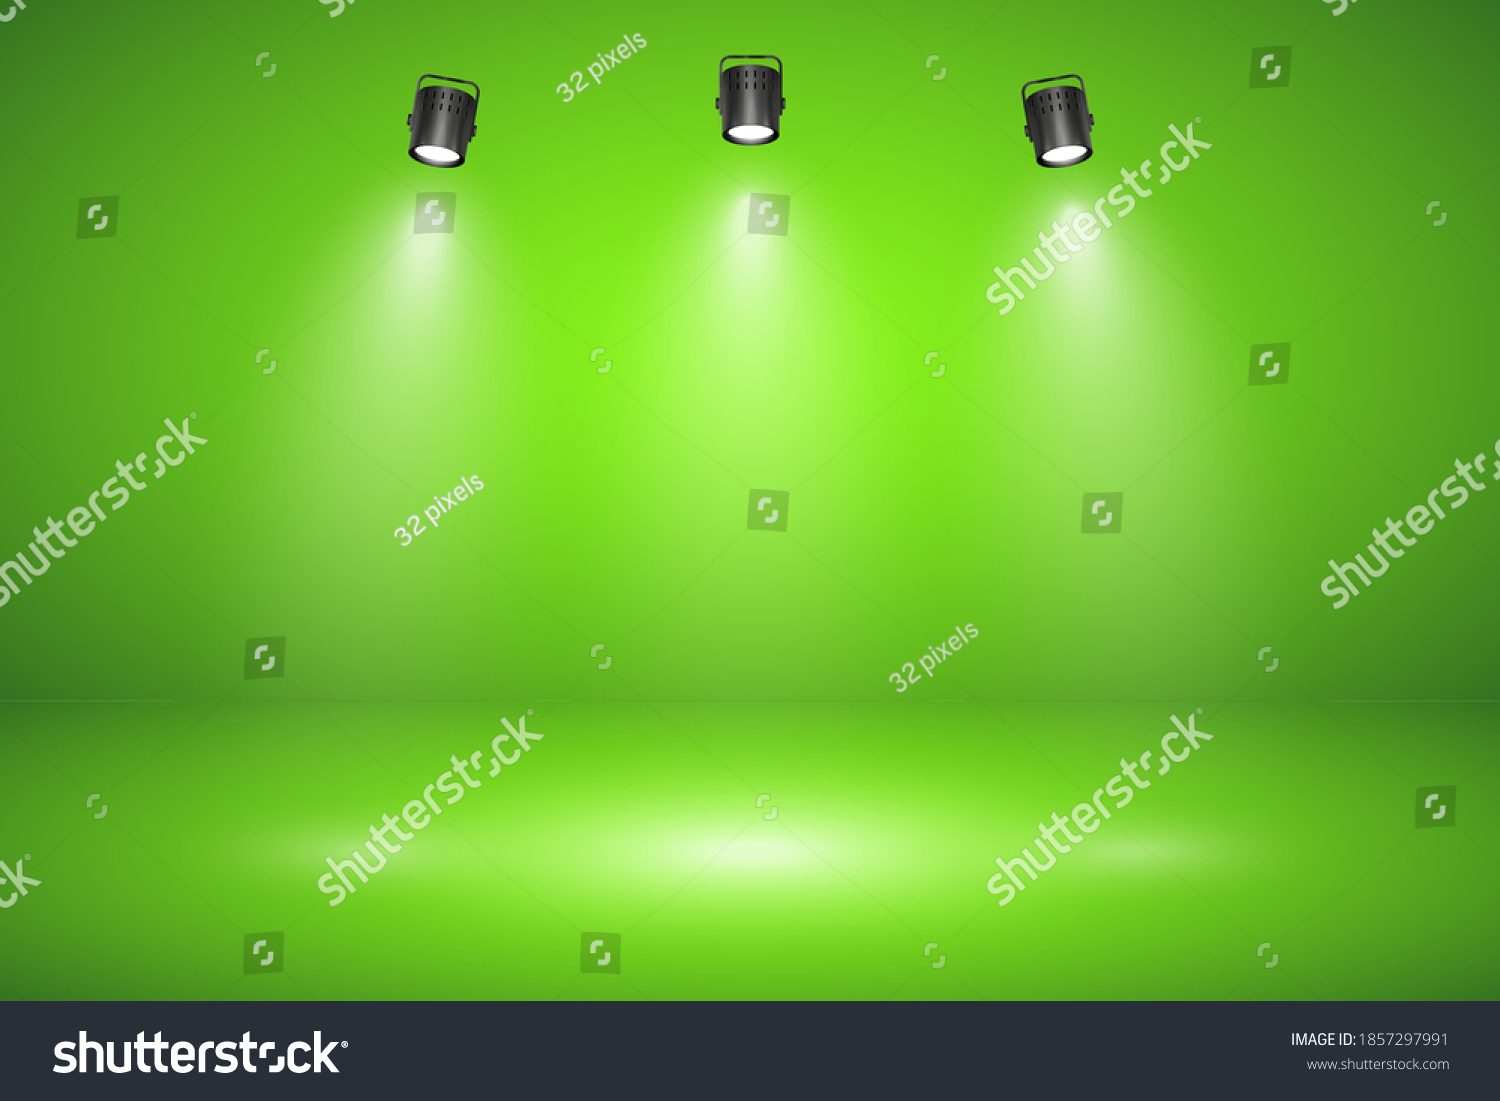 Empty green studio abstract background with spotlight effect. Product showcase backdrop. Chroma key compositing. #1857297991